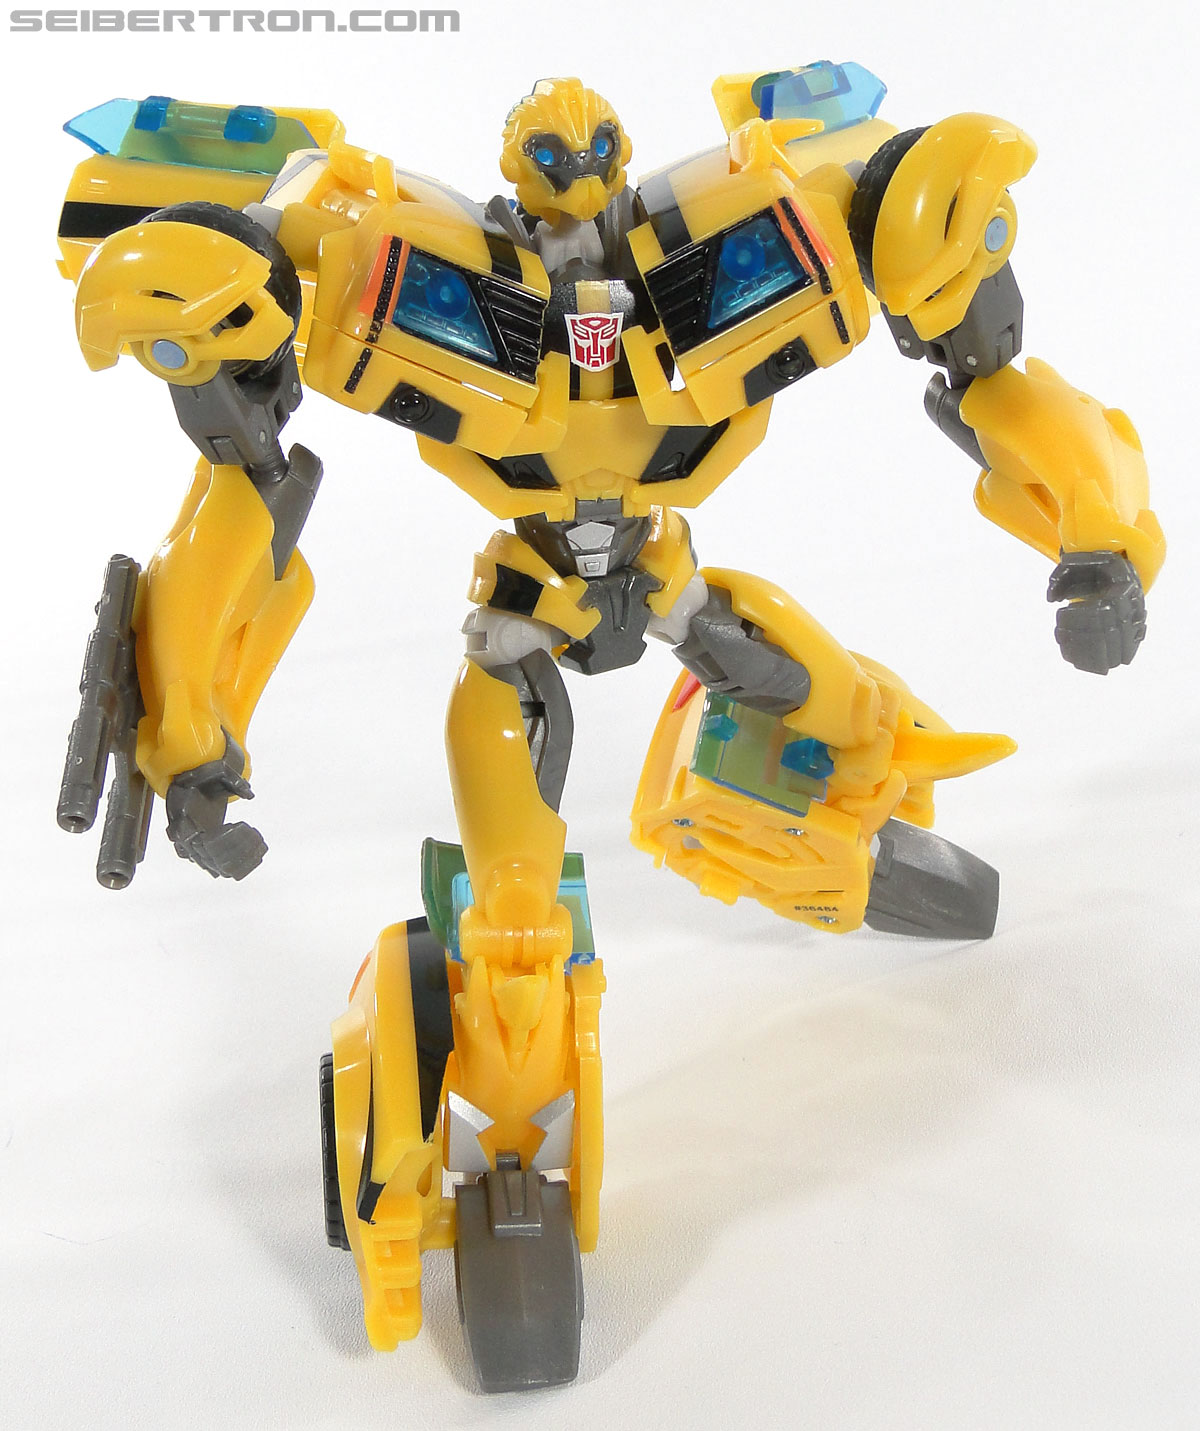 Transformers Prime: First Edition Bumblebee (Image #84 of 130)